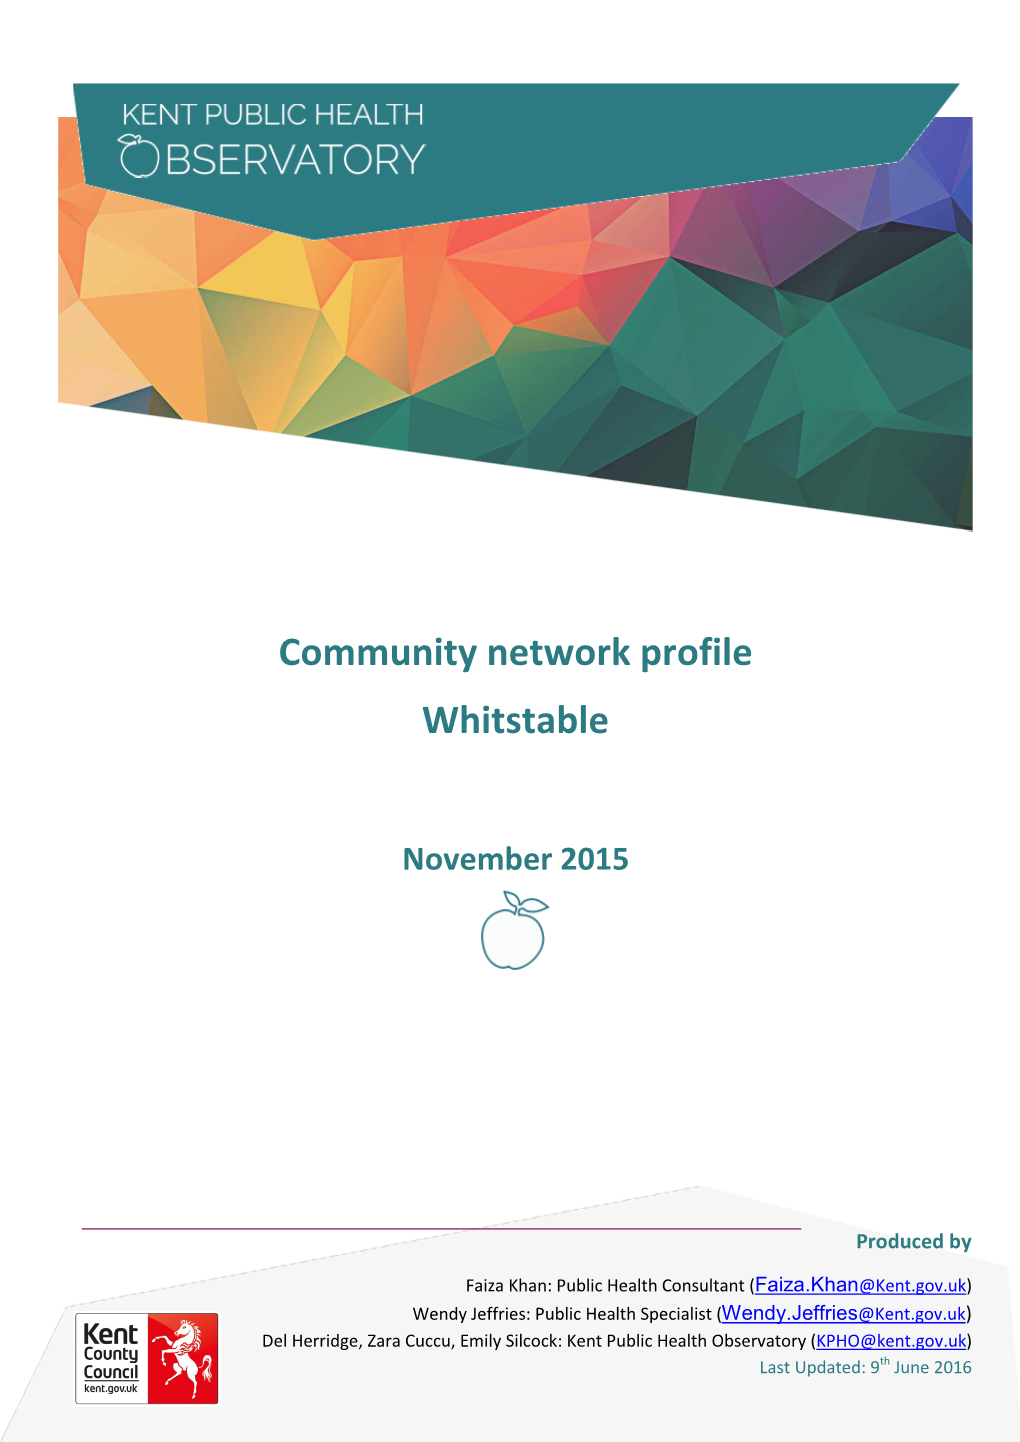 Community Network Profile Whitstable